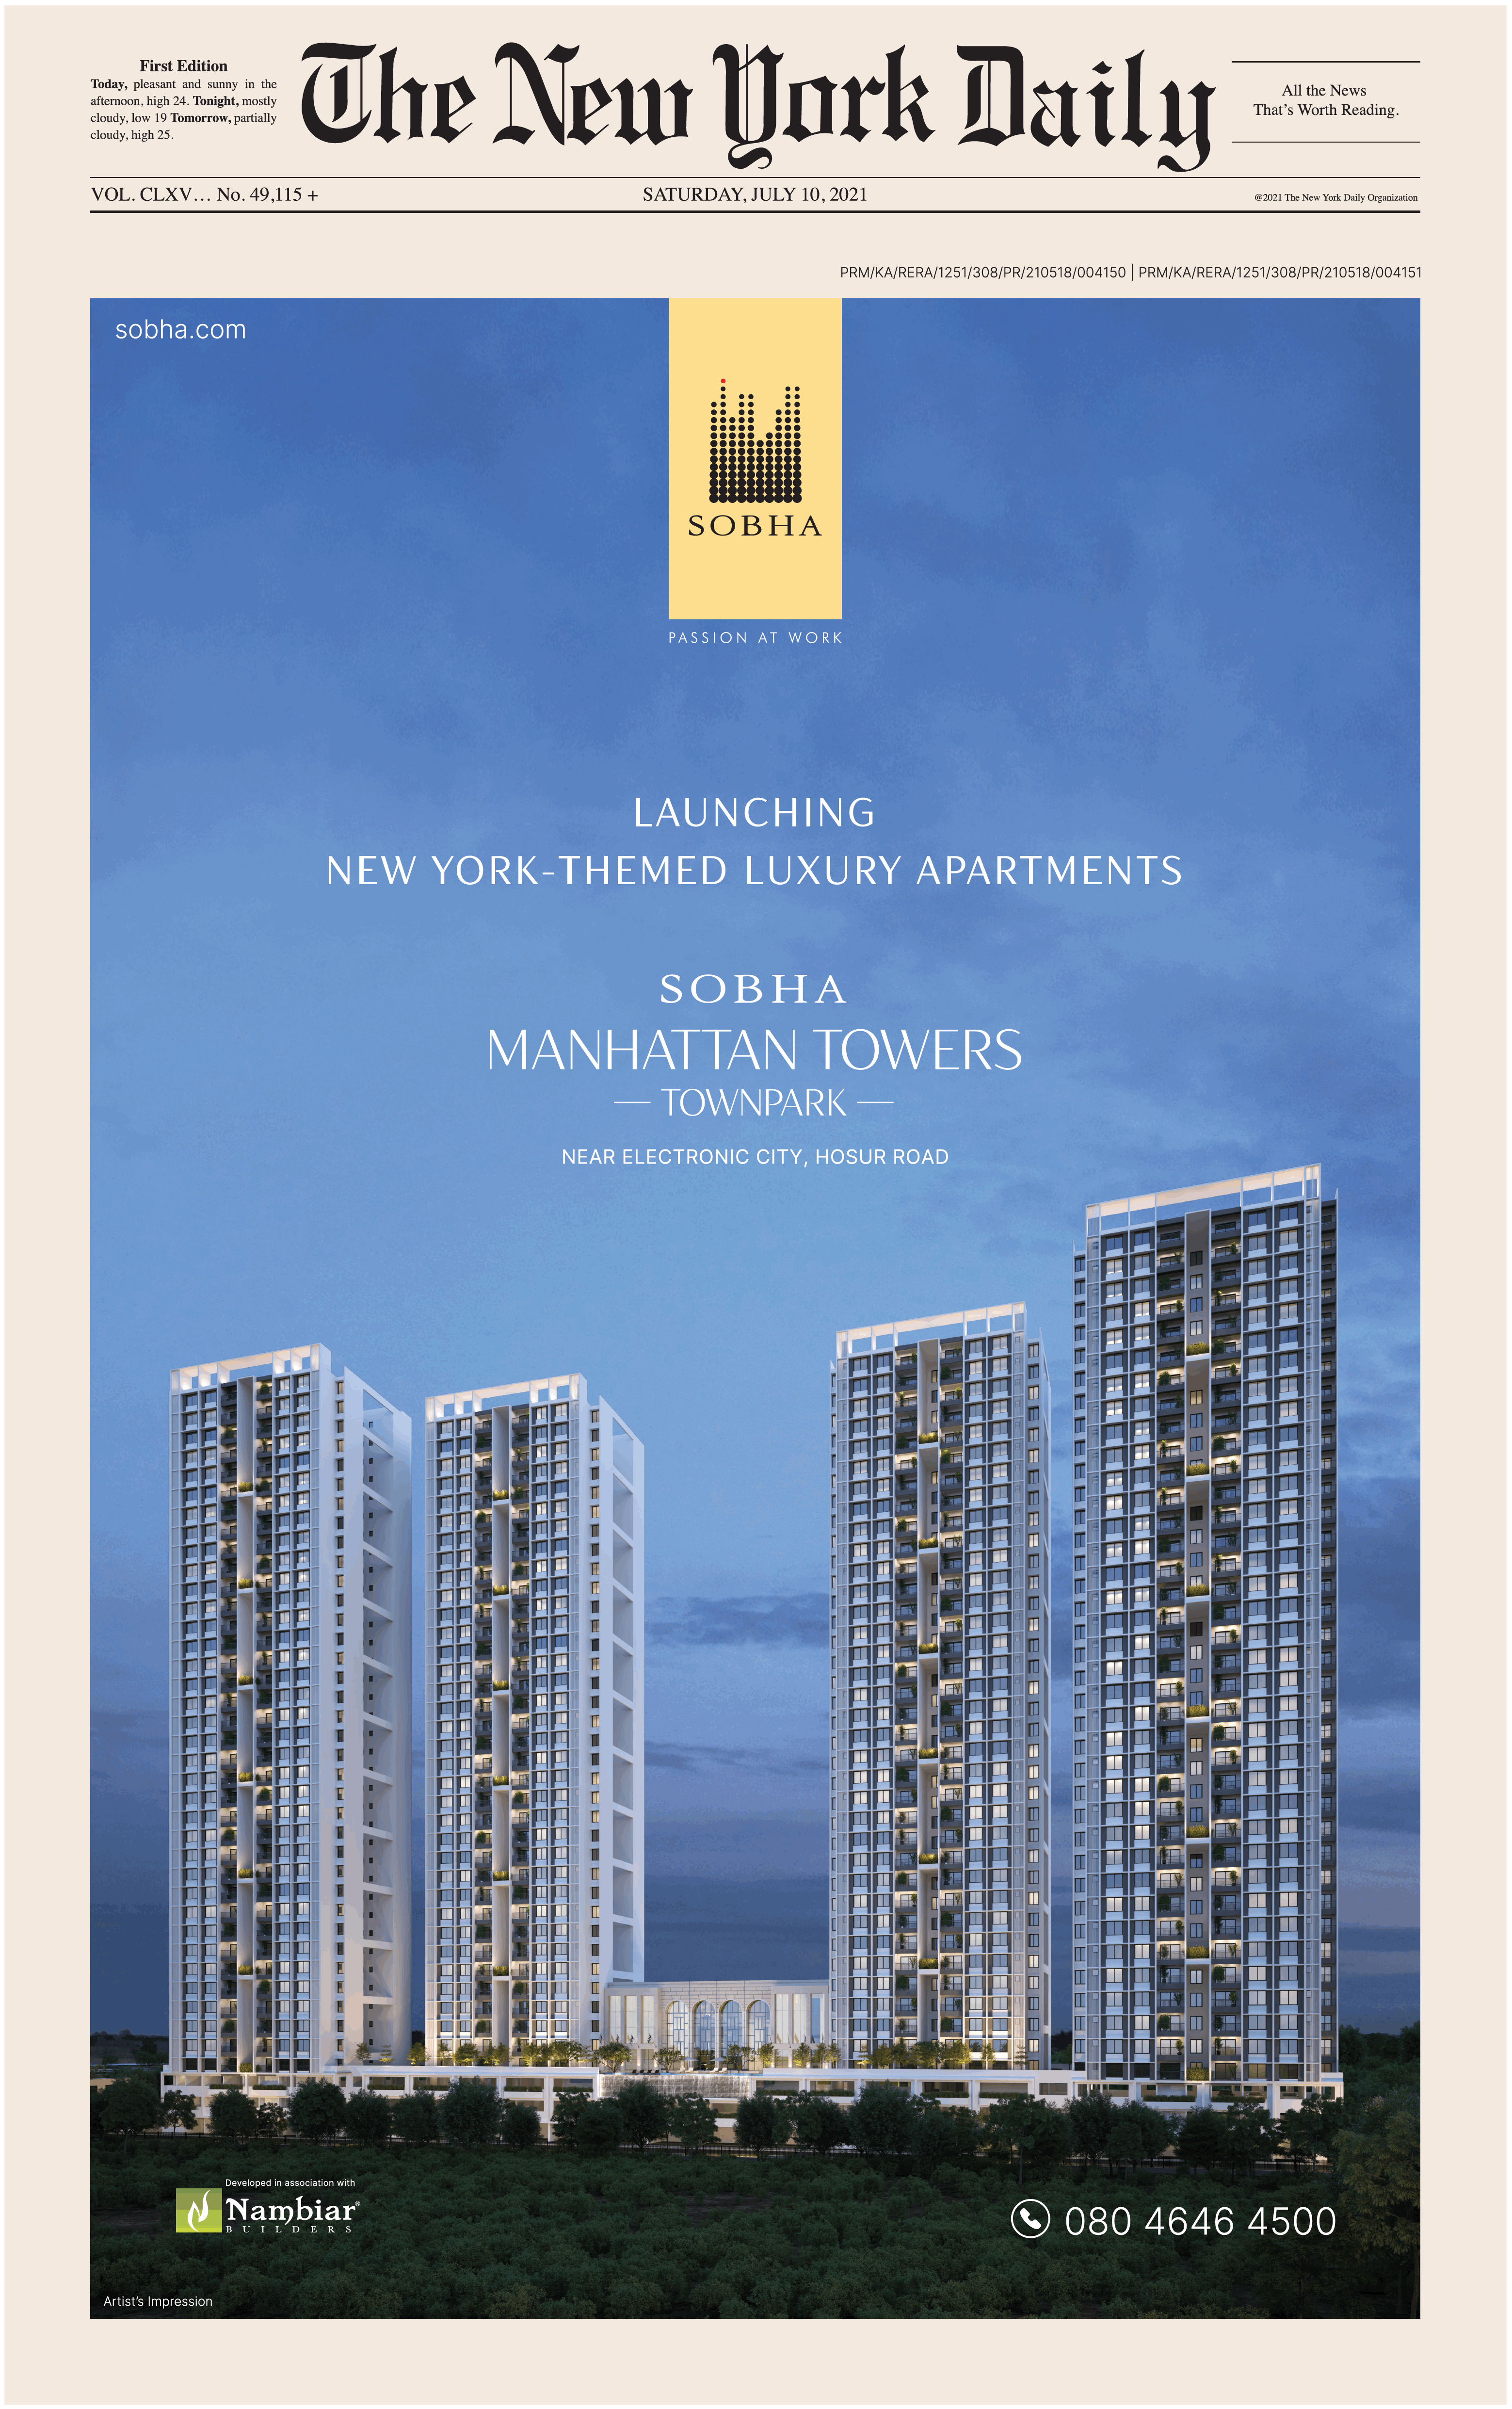 sobha-manhattan-towers-town-park-hosur-road-launching-new-york-themed-luxury-apartments-ad-times-of-india-bangalore-10-7-2021